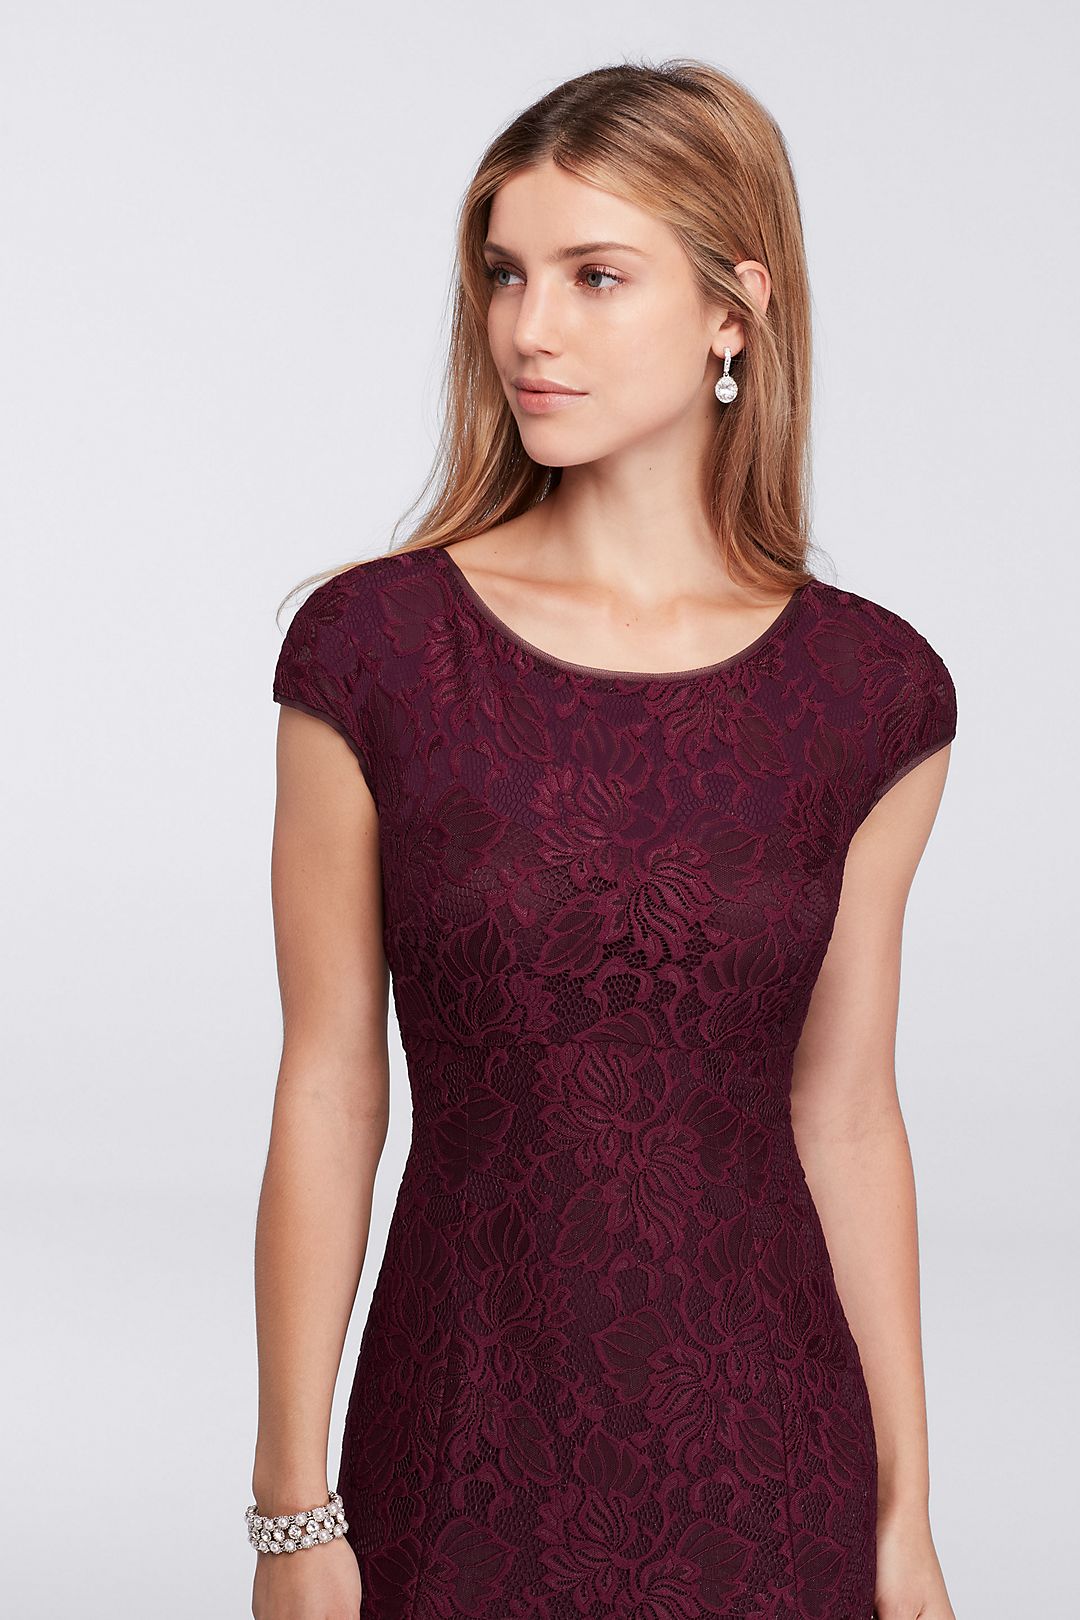 Long Cap-Sleeve Lace Dress with Low Back Image 4